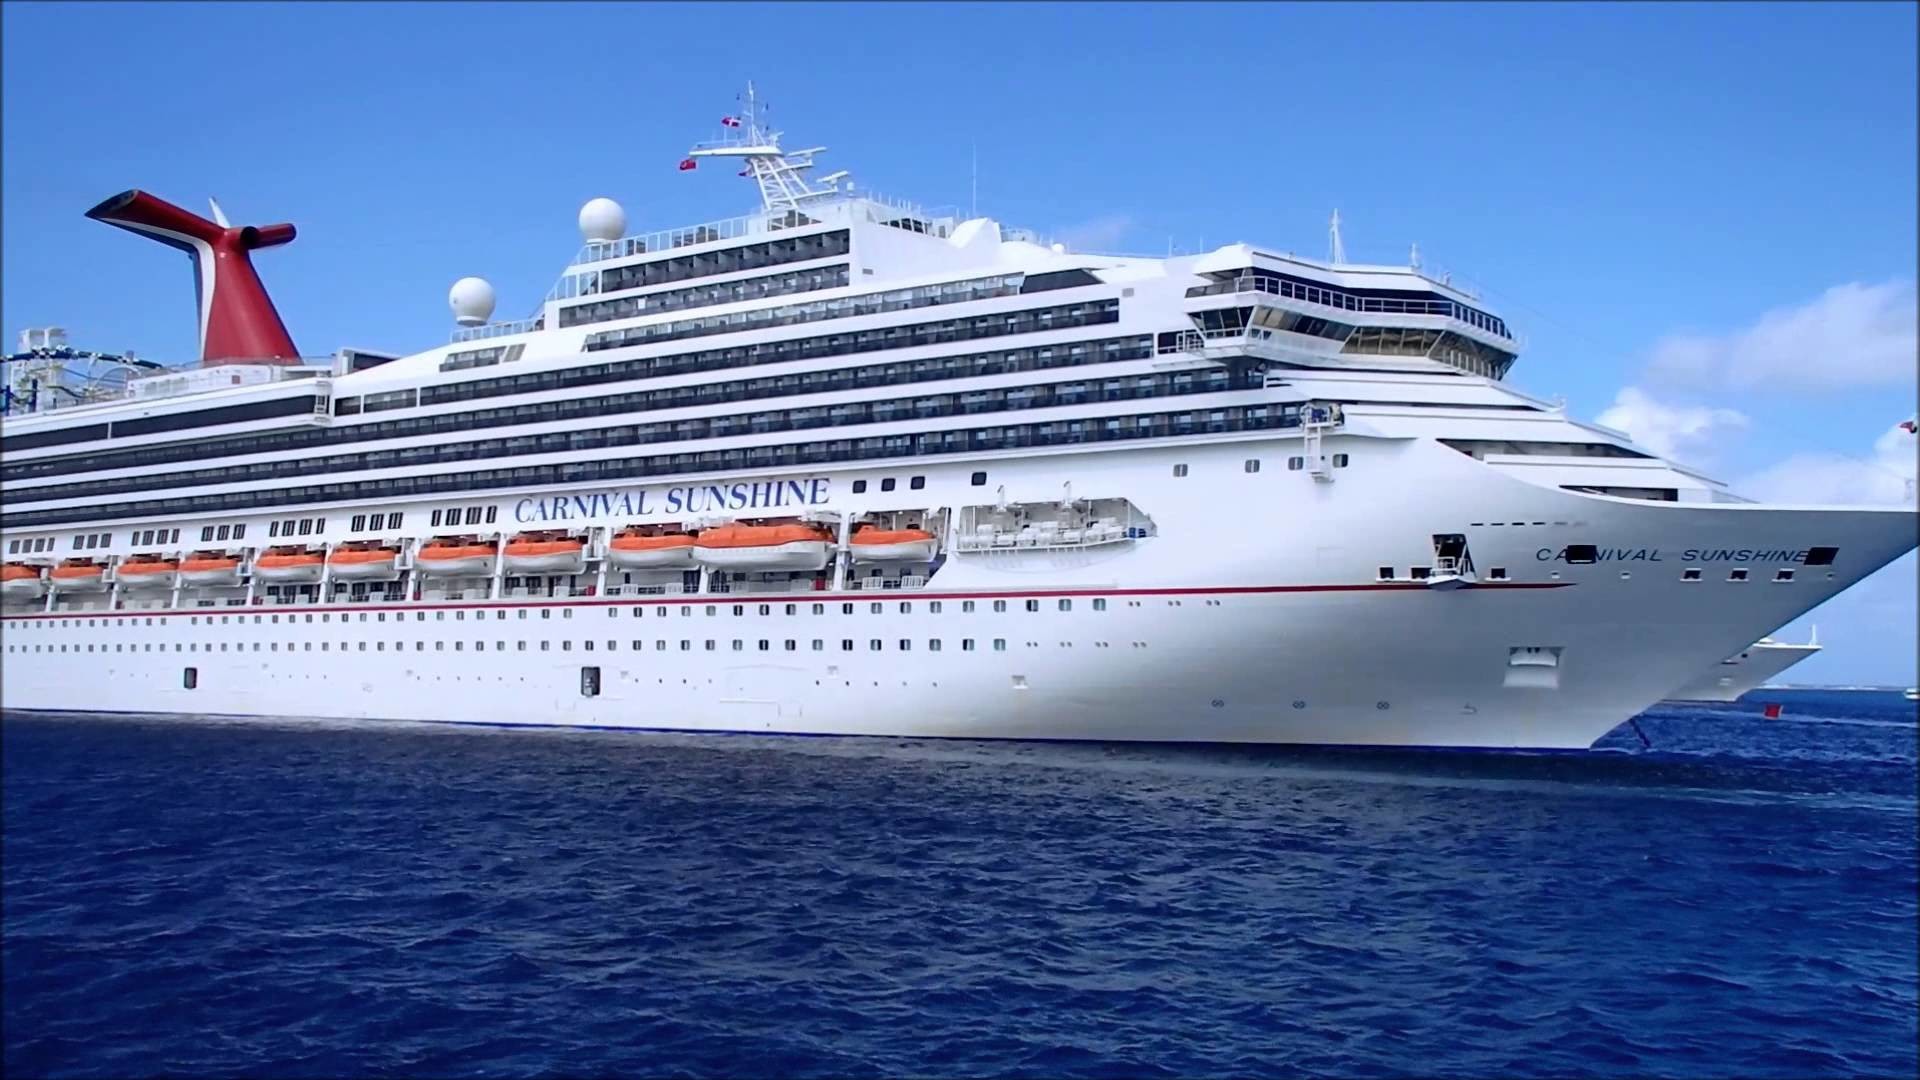 1920x1080 Tender ride from Grand Cayman to the Carnival Sunshine cruise ship - YouTube